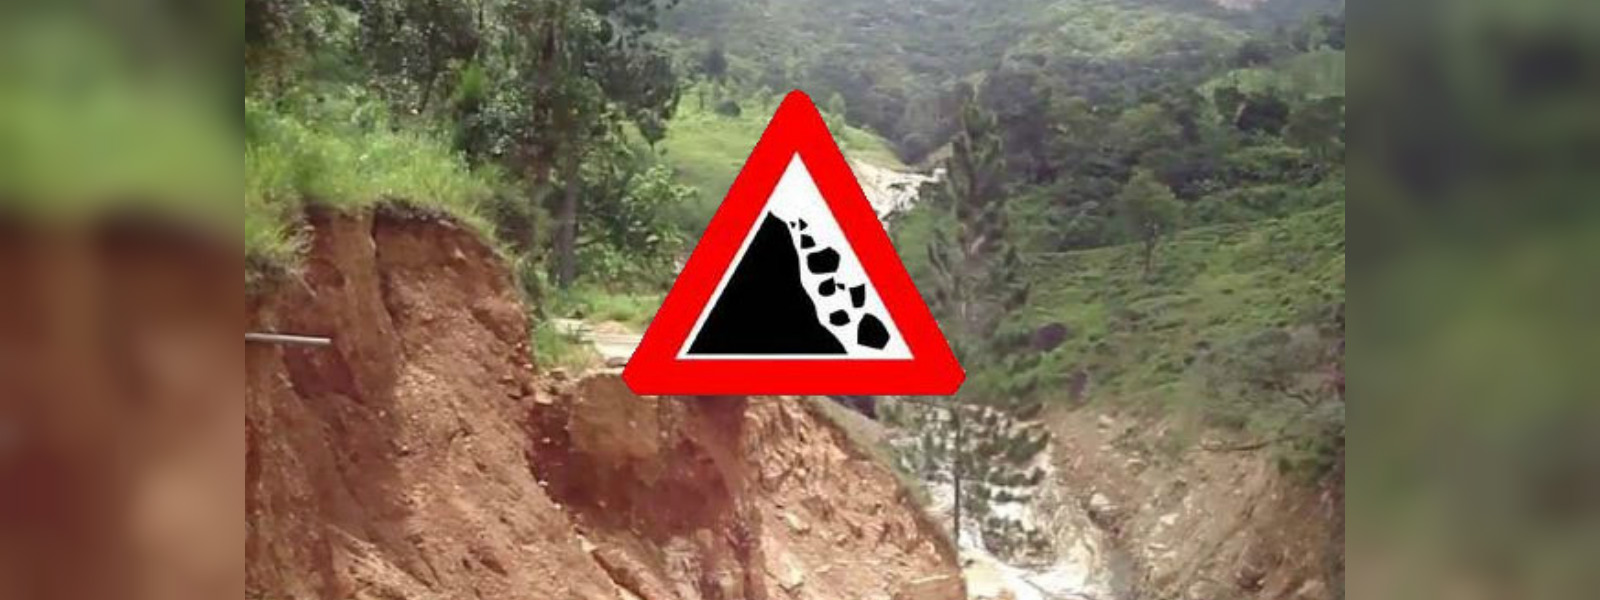 NBRO warnings issued to landslide-prone areas